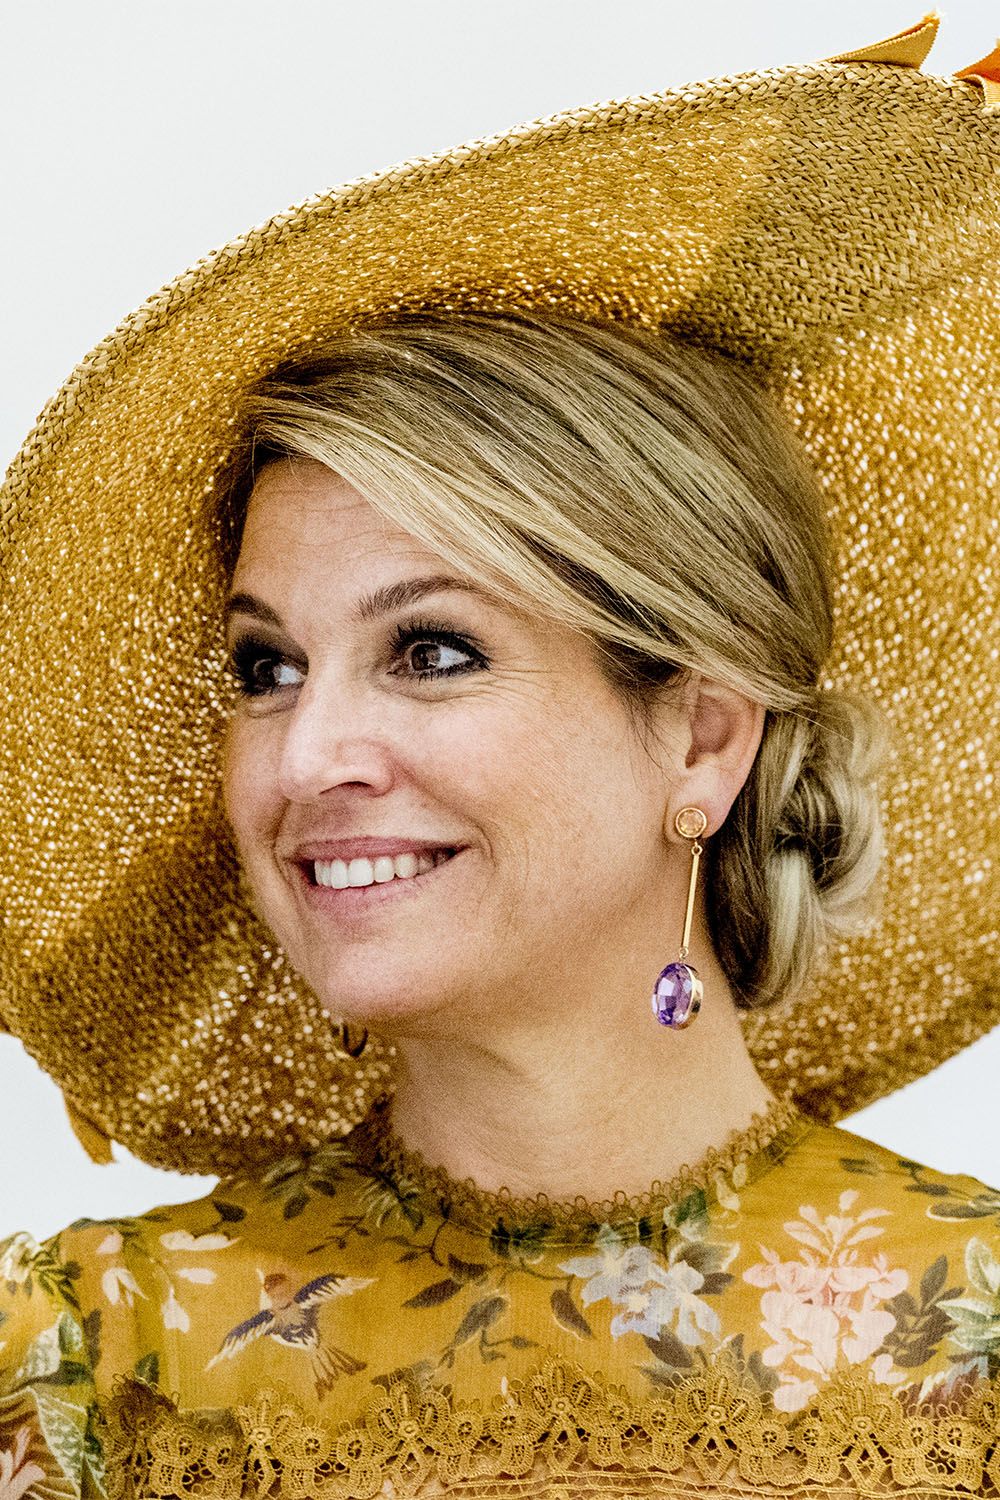 hbz-royal-hair-2017-queen-maxima-netherlands-gettyimages-800101364-1500305811.jpg